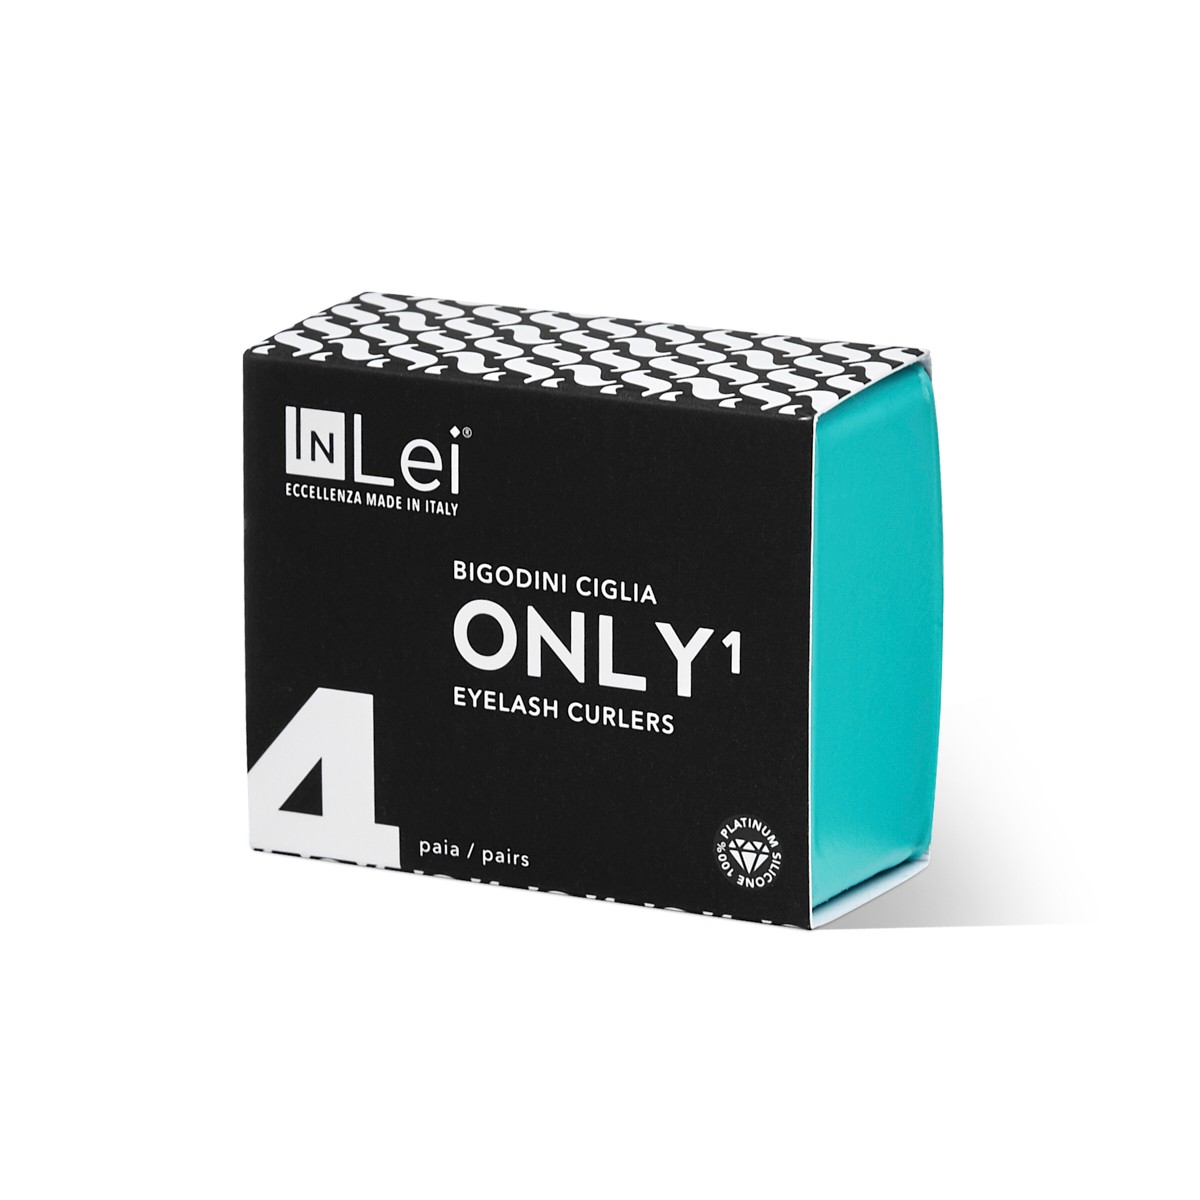 InLei® ONLY1 - Silicone Lash Curlers (4 pairs)